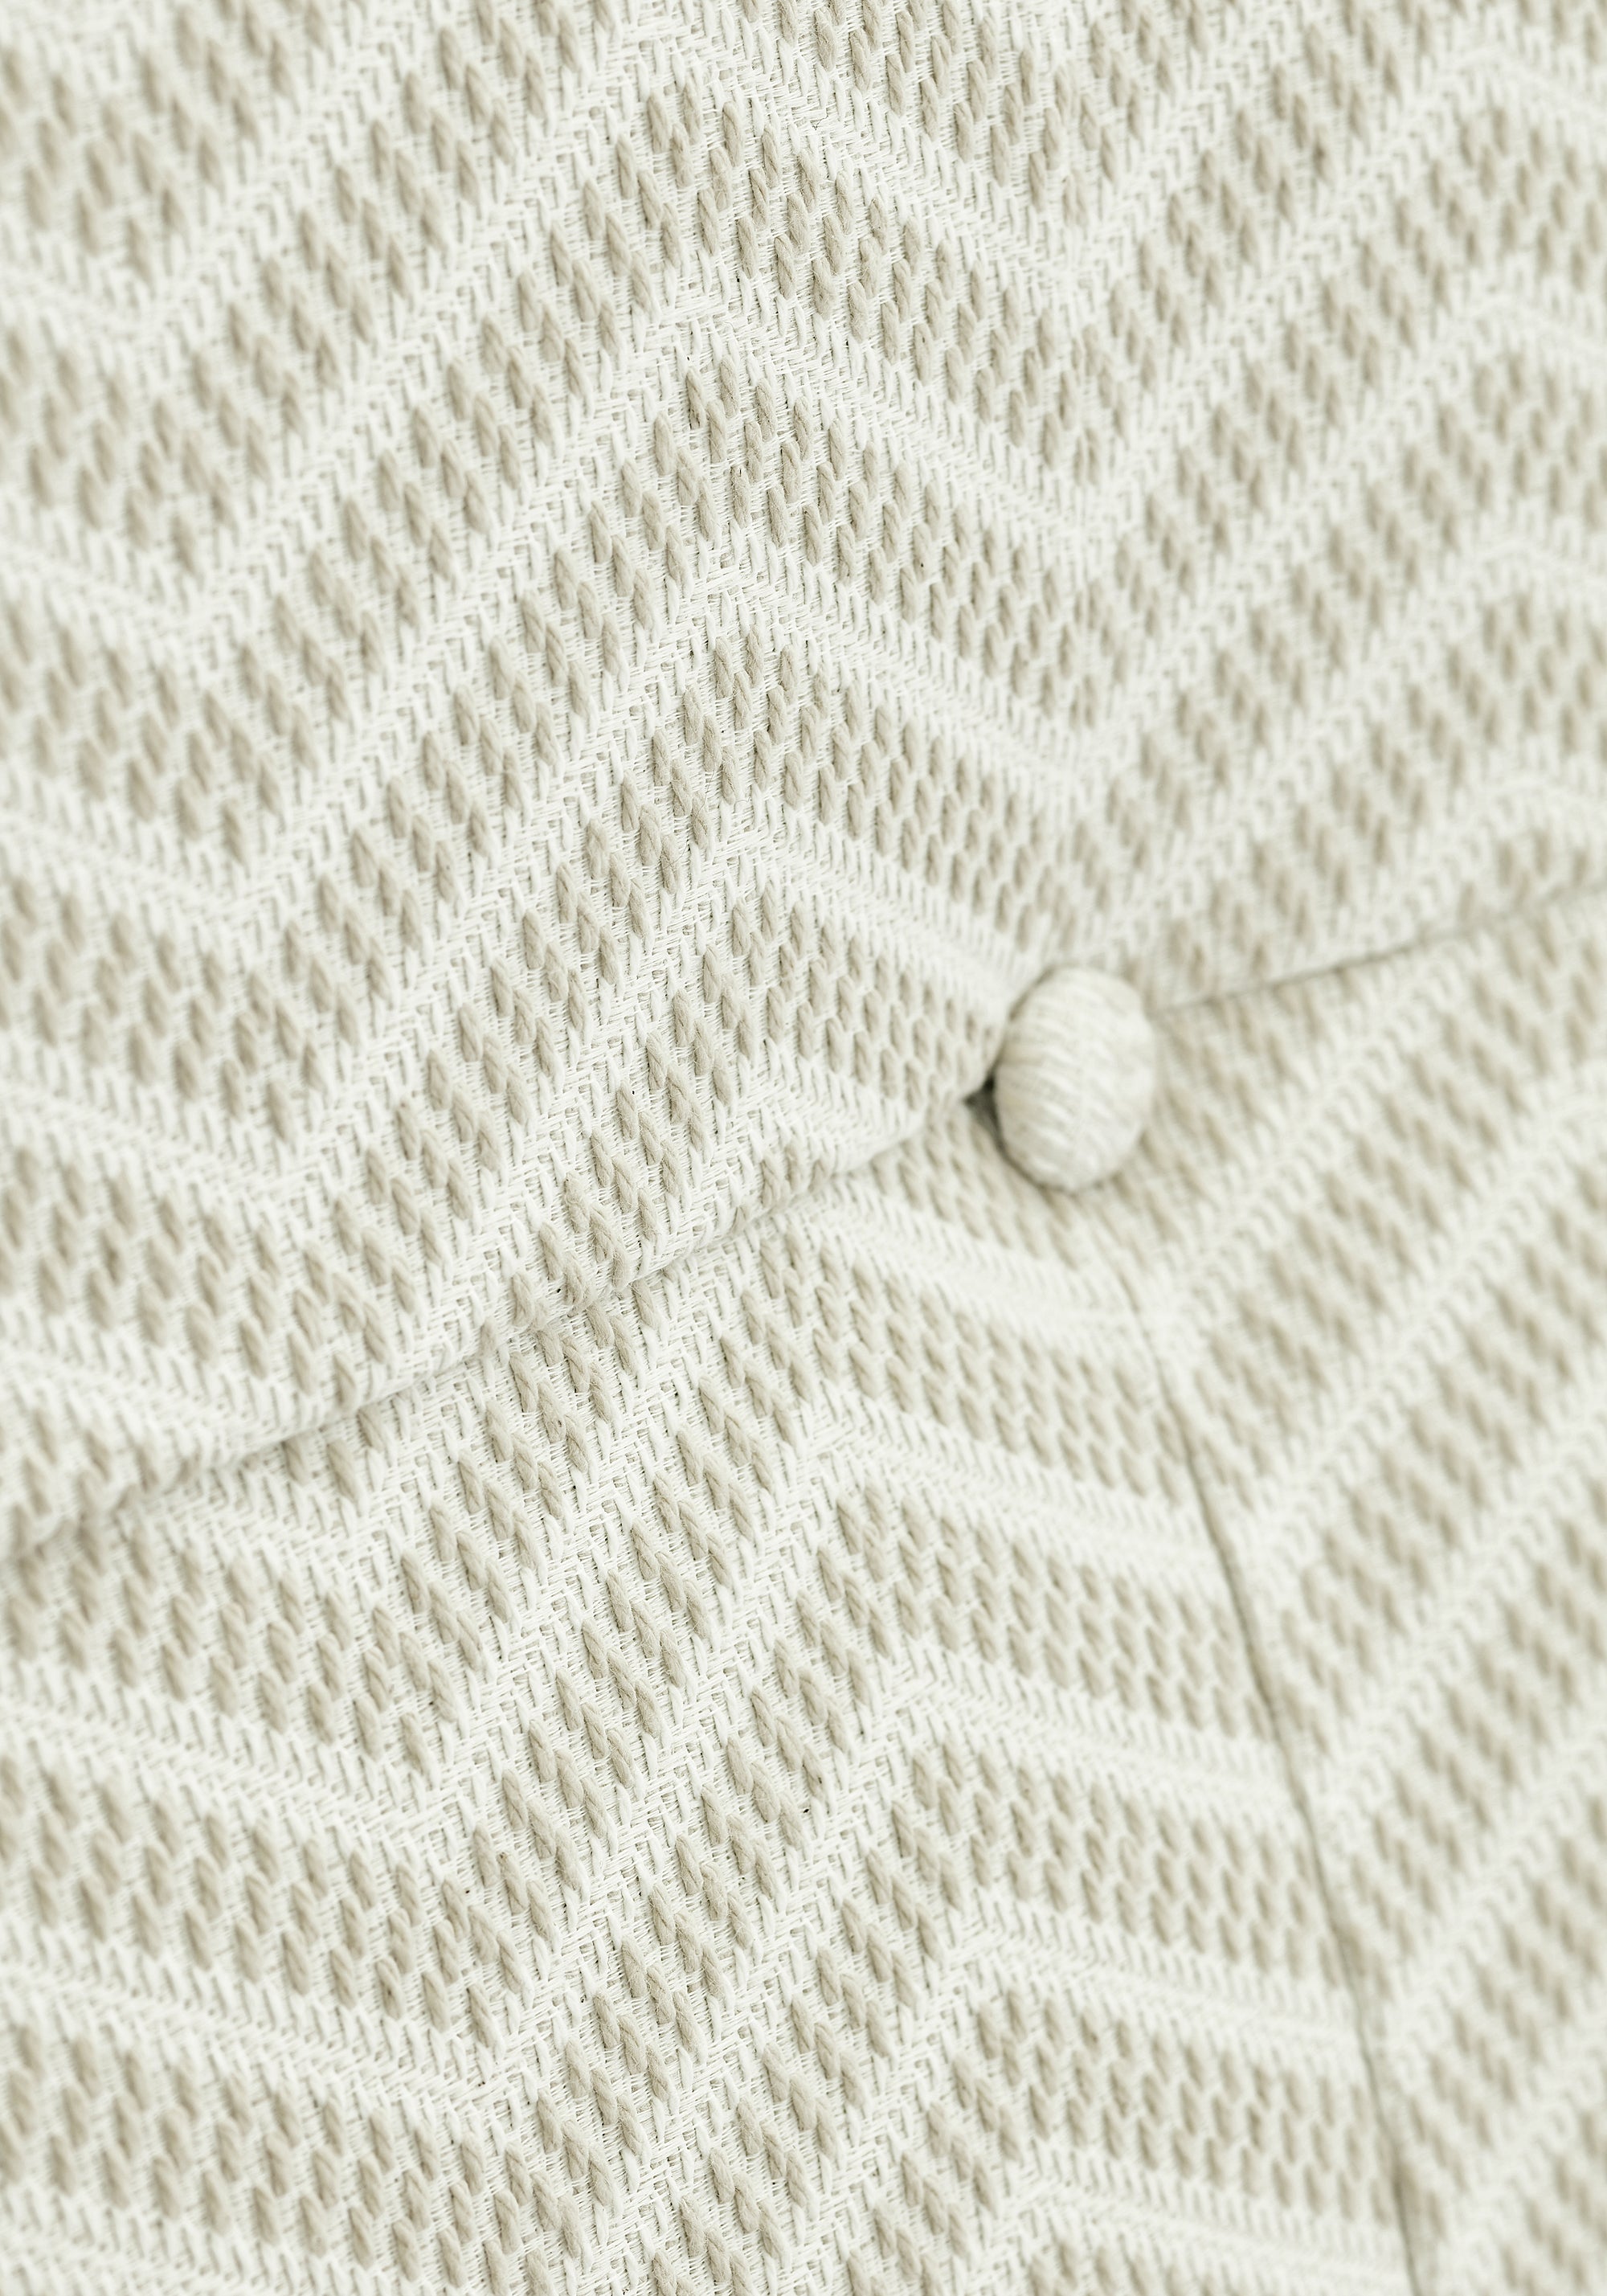 Detailed Matari Chevron woven fabric in almond color, pattern number W80631 of the Thibaut Pinnacle collection